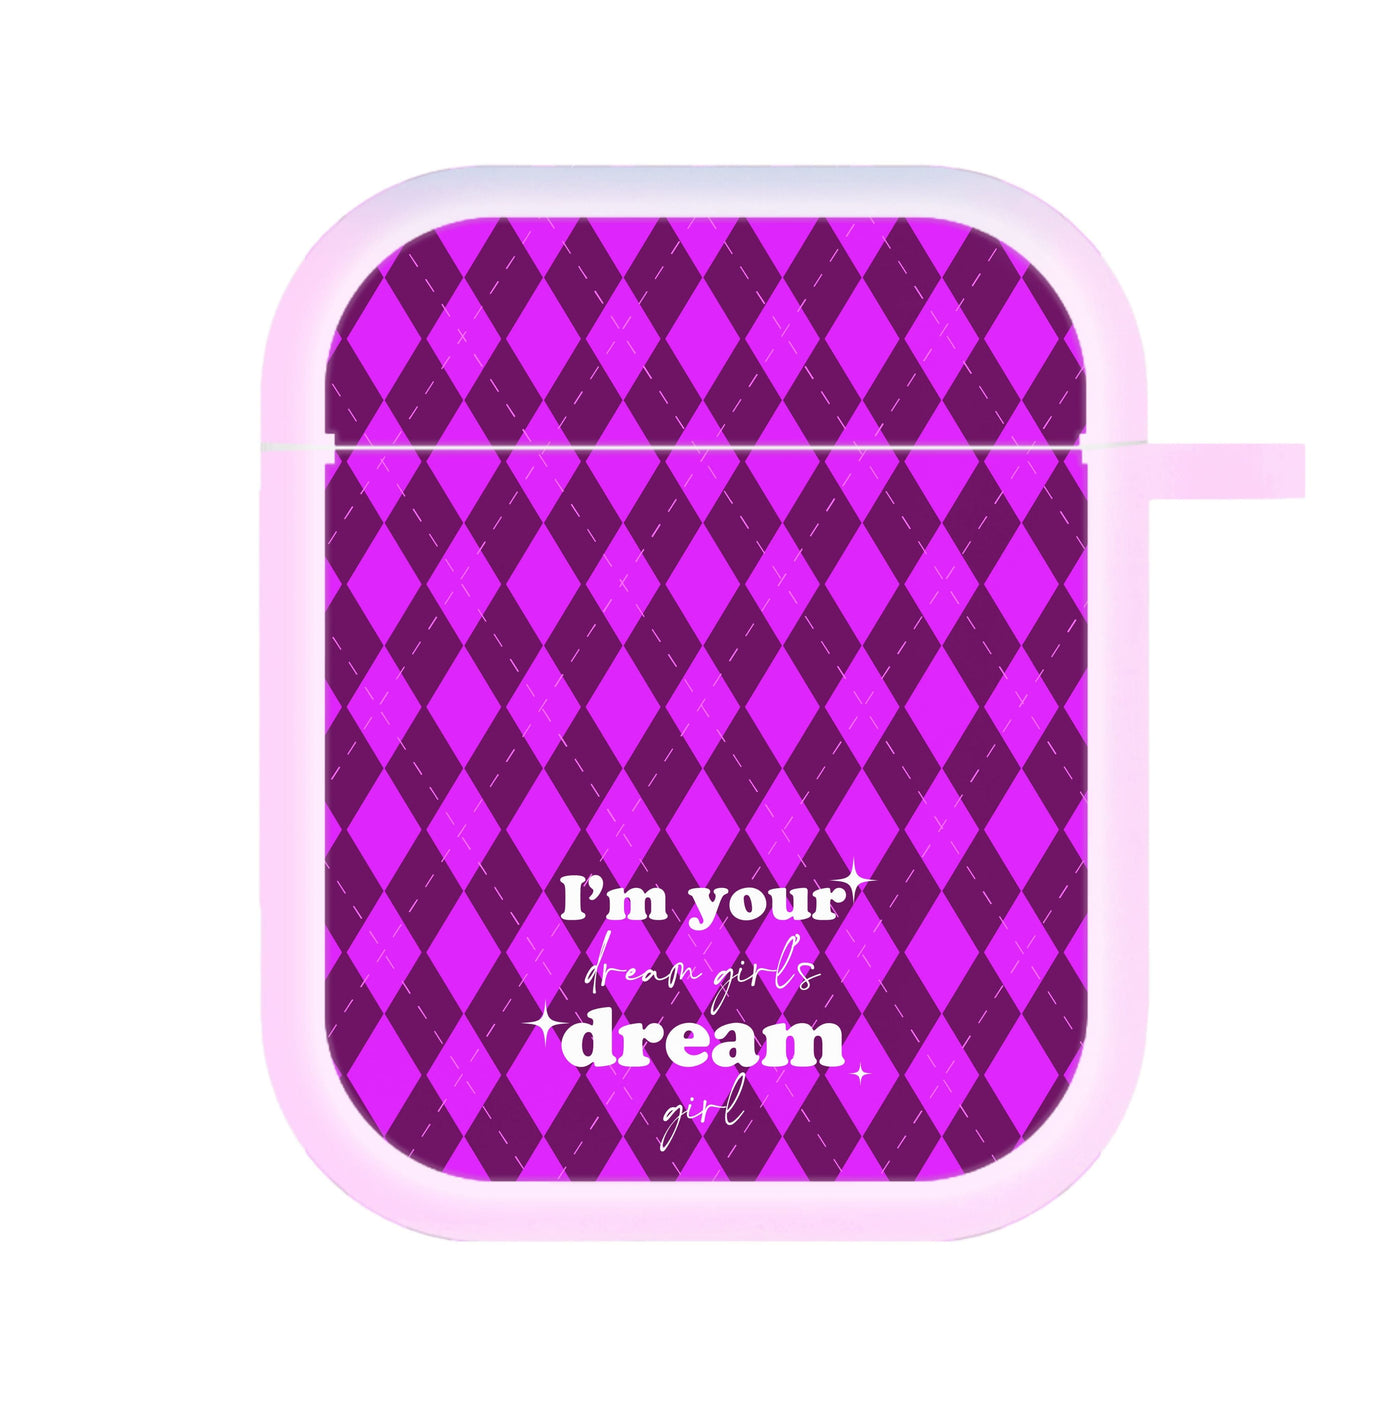 I'm Your Dream Girls Dream Girl - Chappell Roan AirPods Case